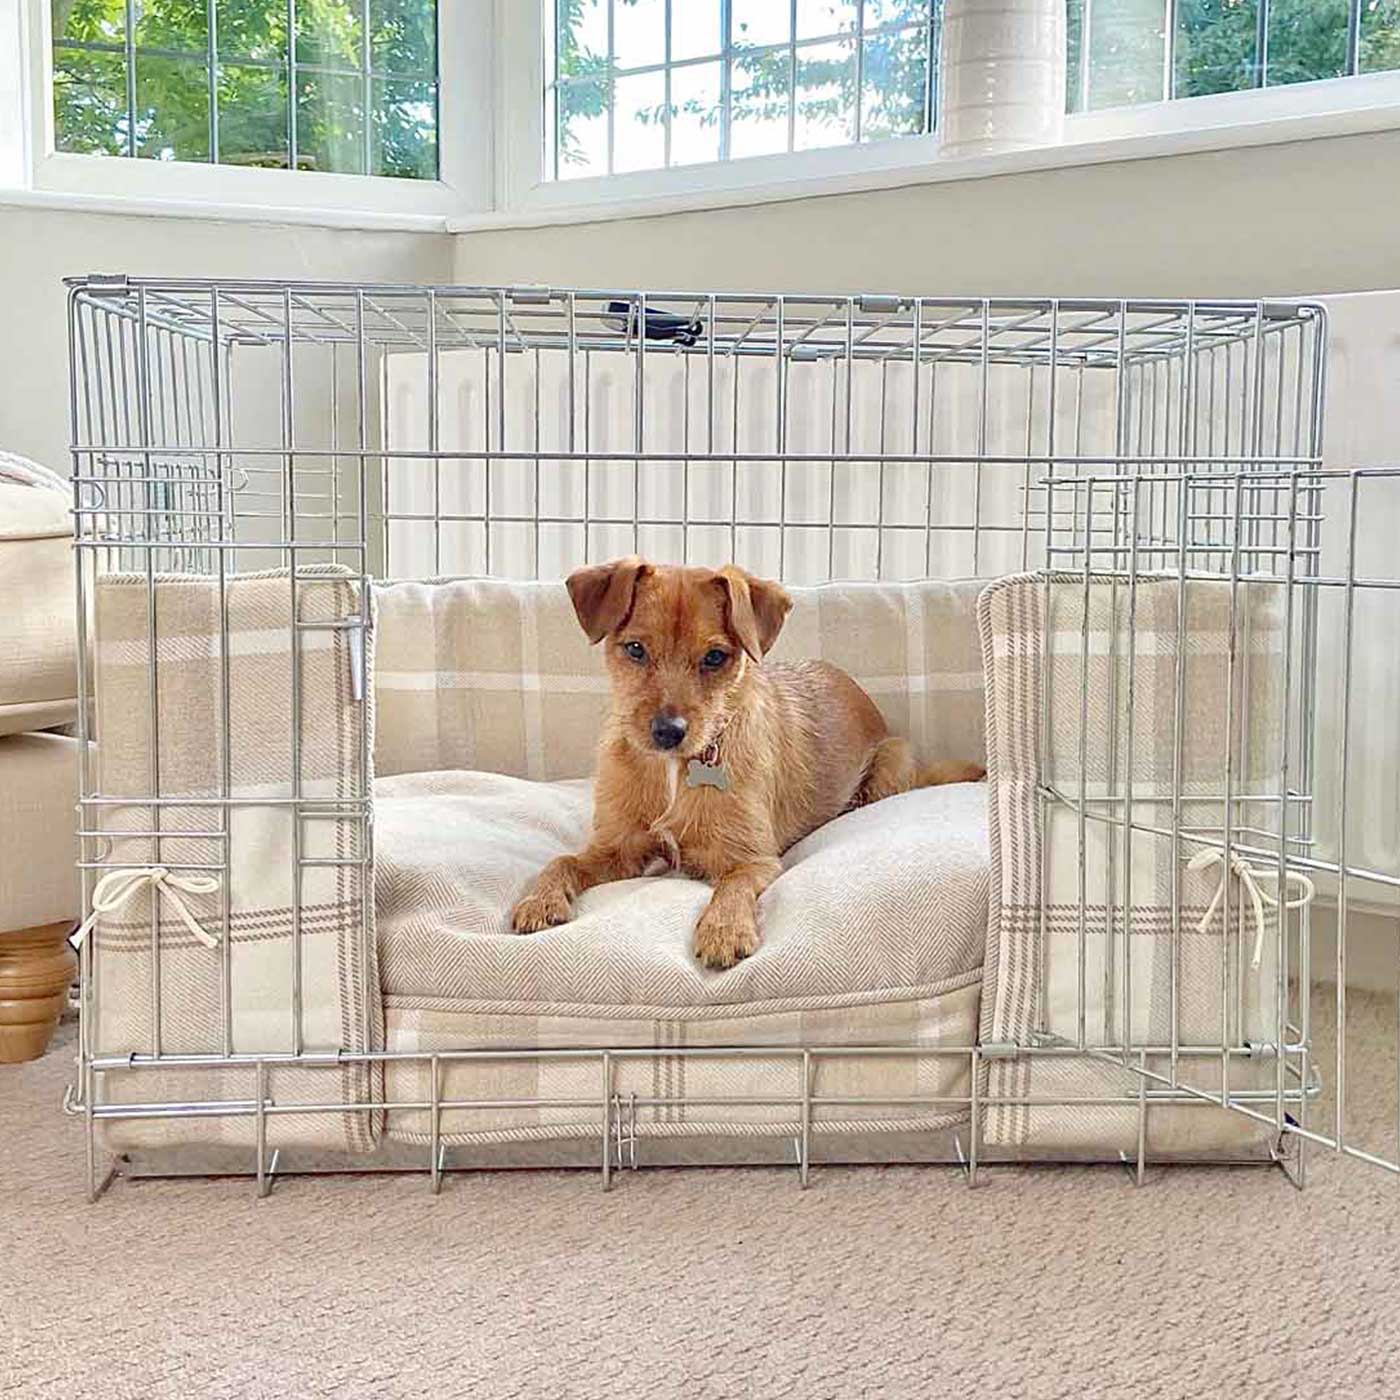 Luxury Dog Crate Bumper, Balmoral Natural Tweed Crate Bumper Cover The Perfect Dog Crate Accessory, Available To Personalise Now at Lords & Labradors